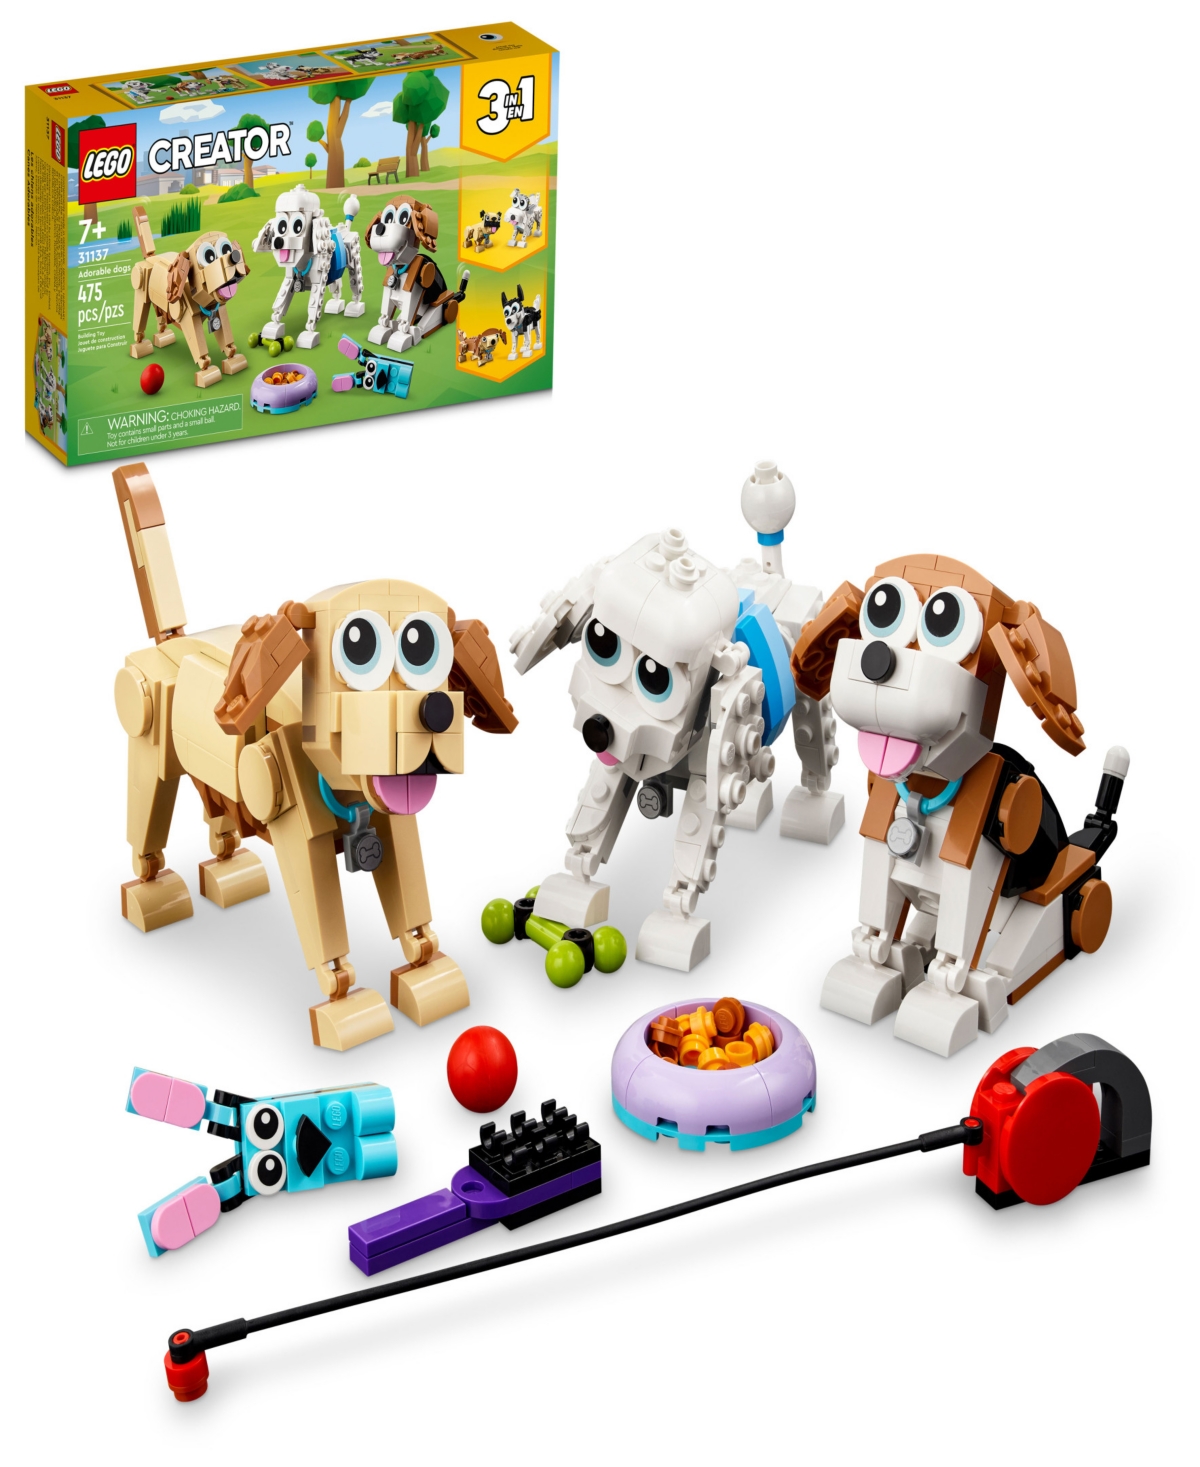 Lego Creator 31137 3-in-1 Adorable Dogs Toy Building Set With Beagle, Poodle And Labrador Builds In Multicolor